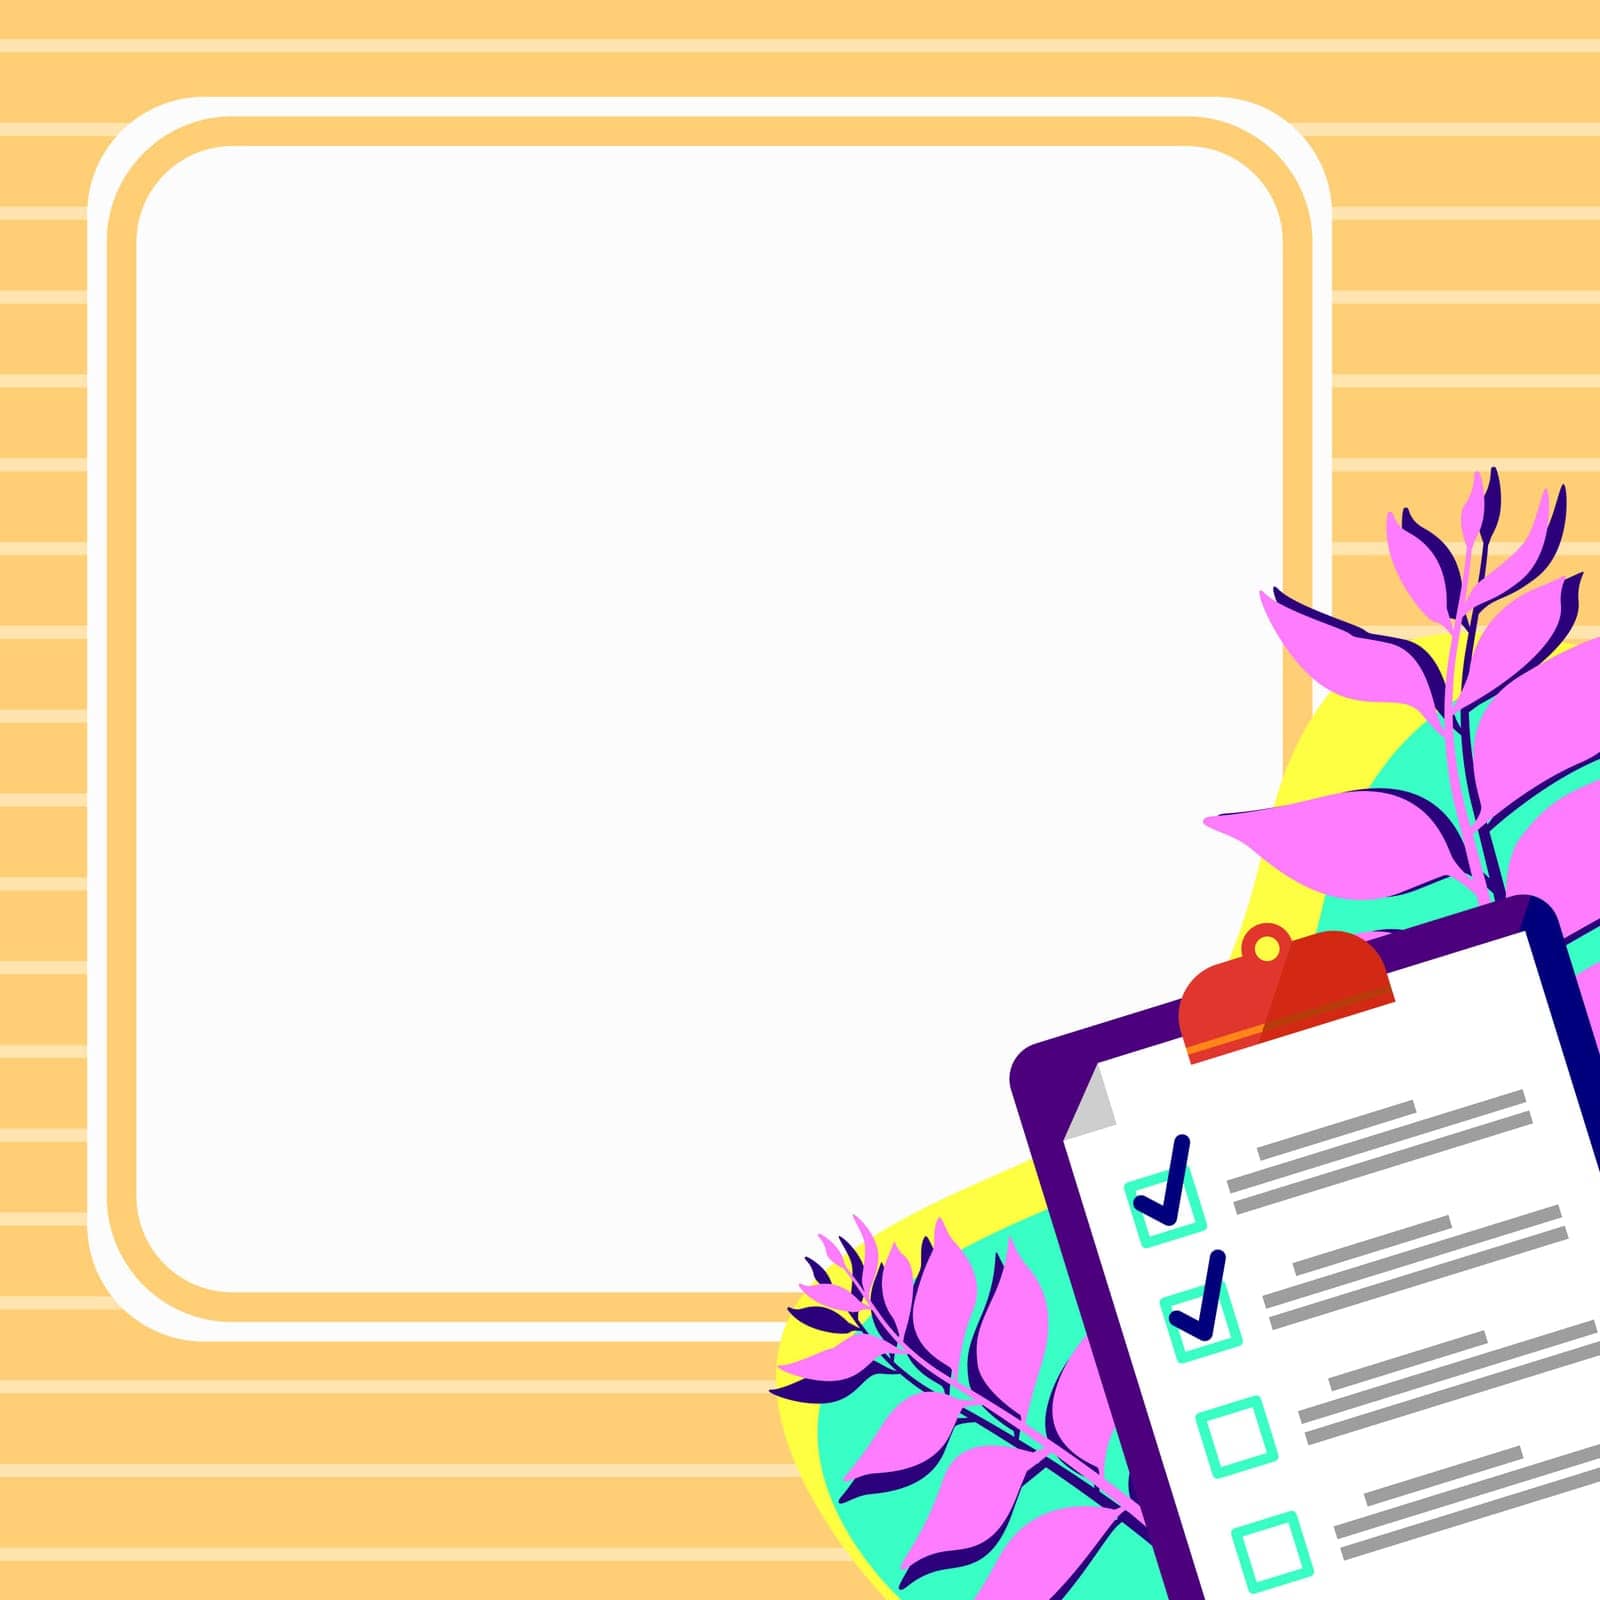 Paper with plan on bright colored background. White text holder with important information. Empty speech bubble for main message. Dialogue Balloon contains Announcements. by nialowwa